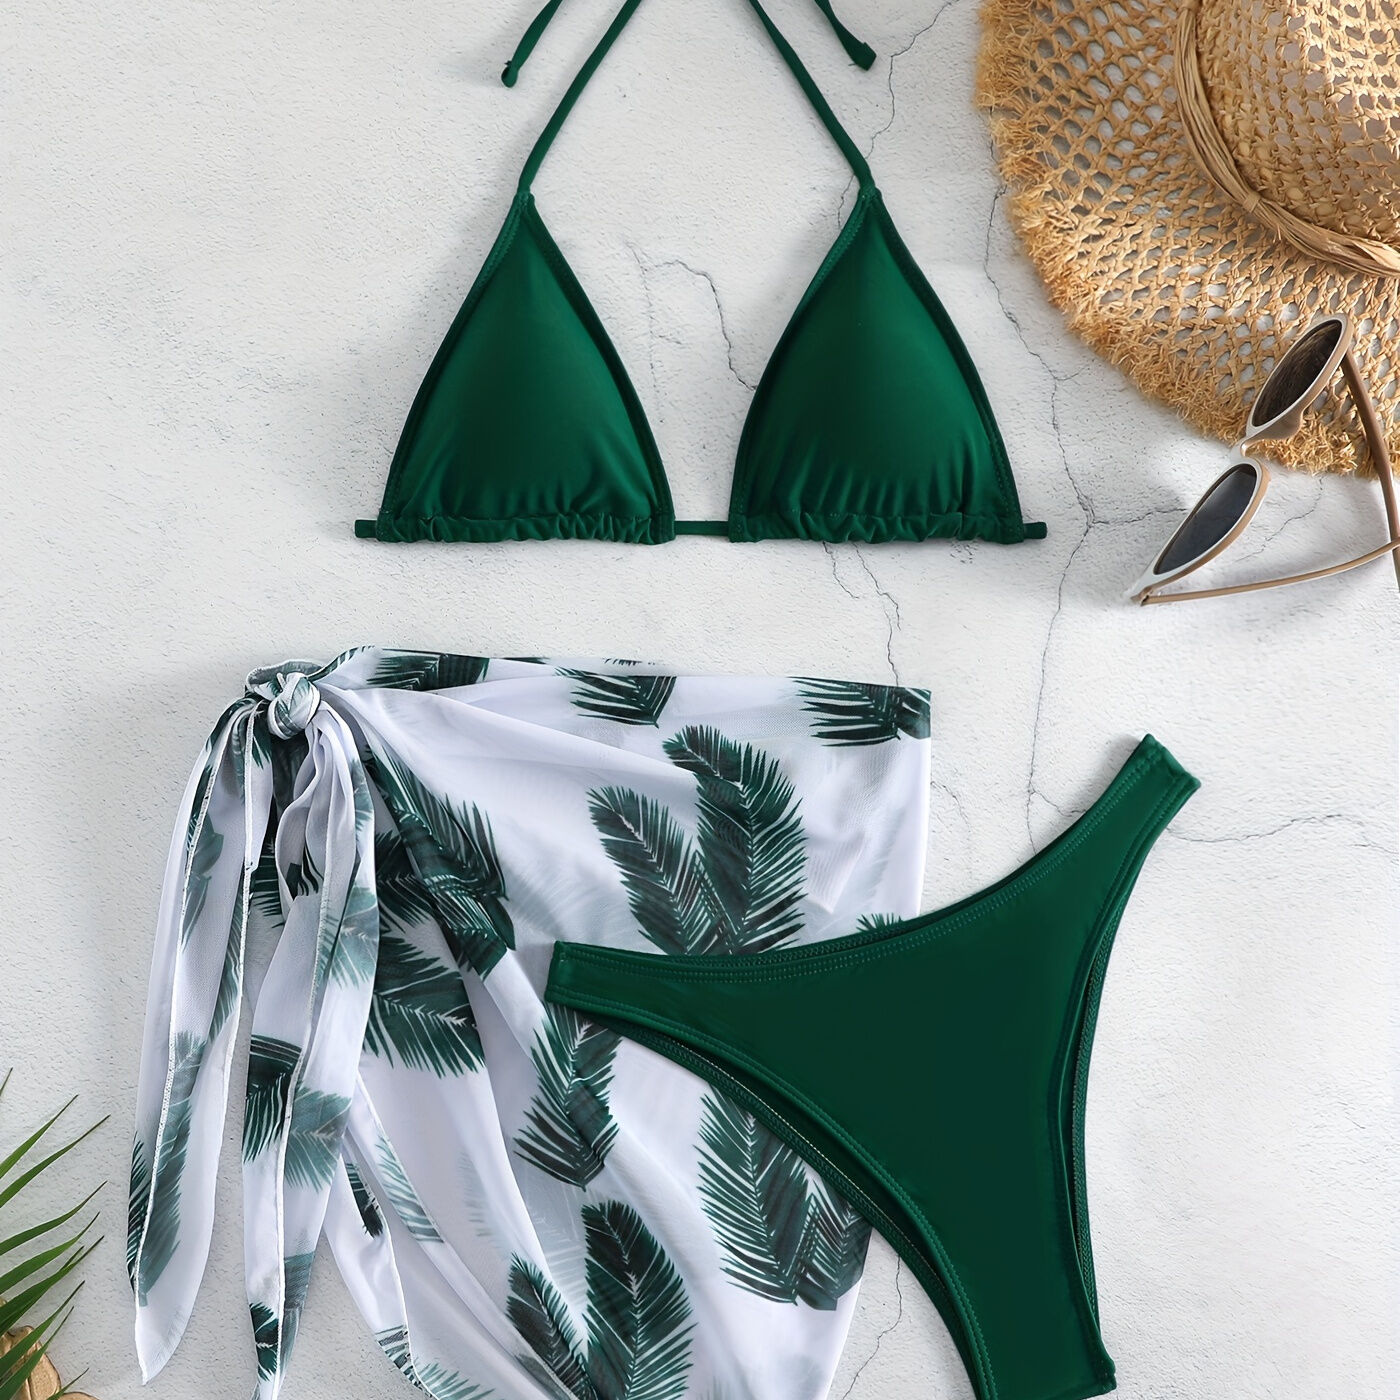 Temu 3-piece Feather Print Bikini Sets, Halter Neck Tie Back Backless High Cut With Cover Up Wrap Swimsuit, Women's Swimwear & Clothing Green L(8/10)